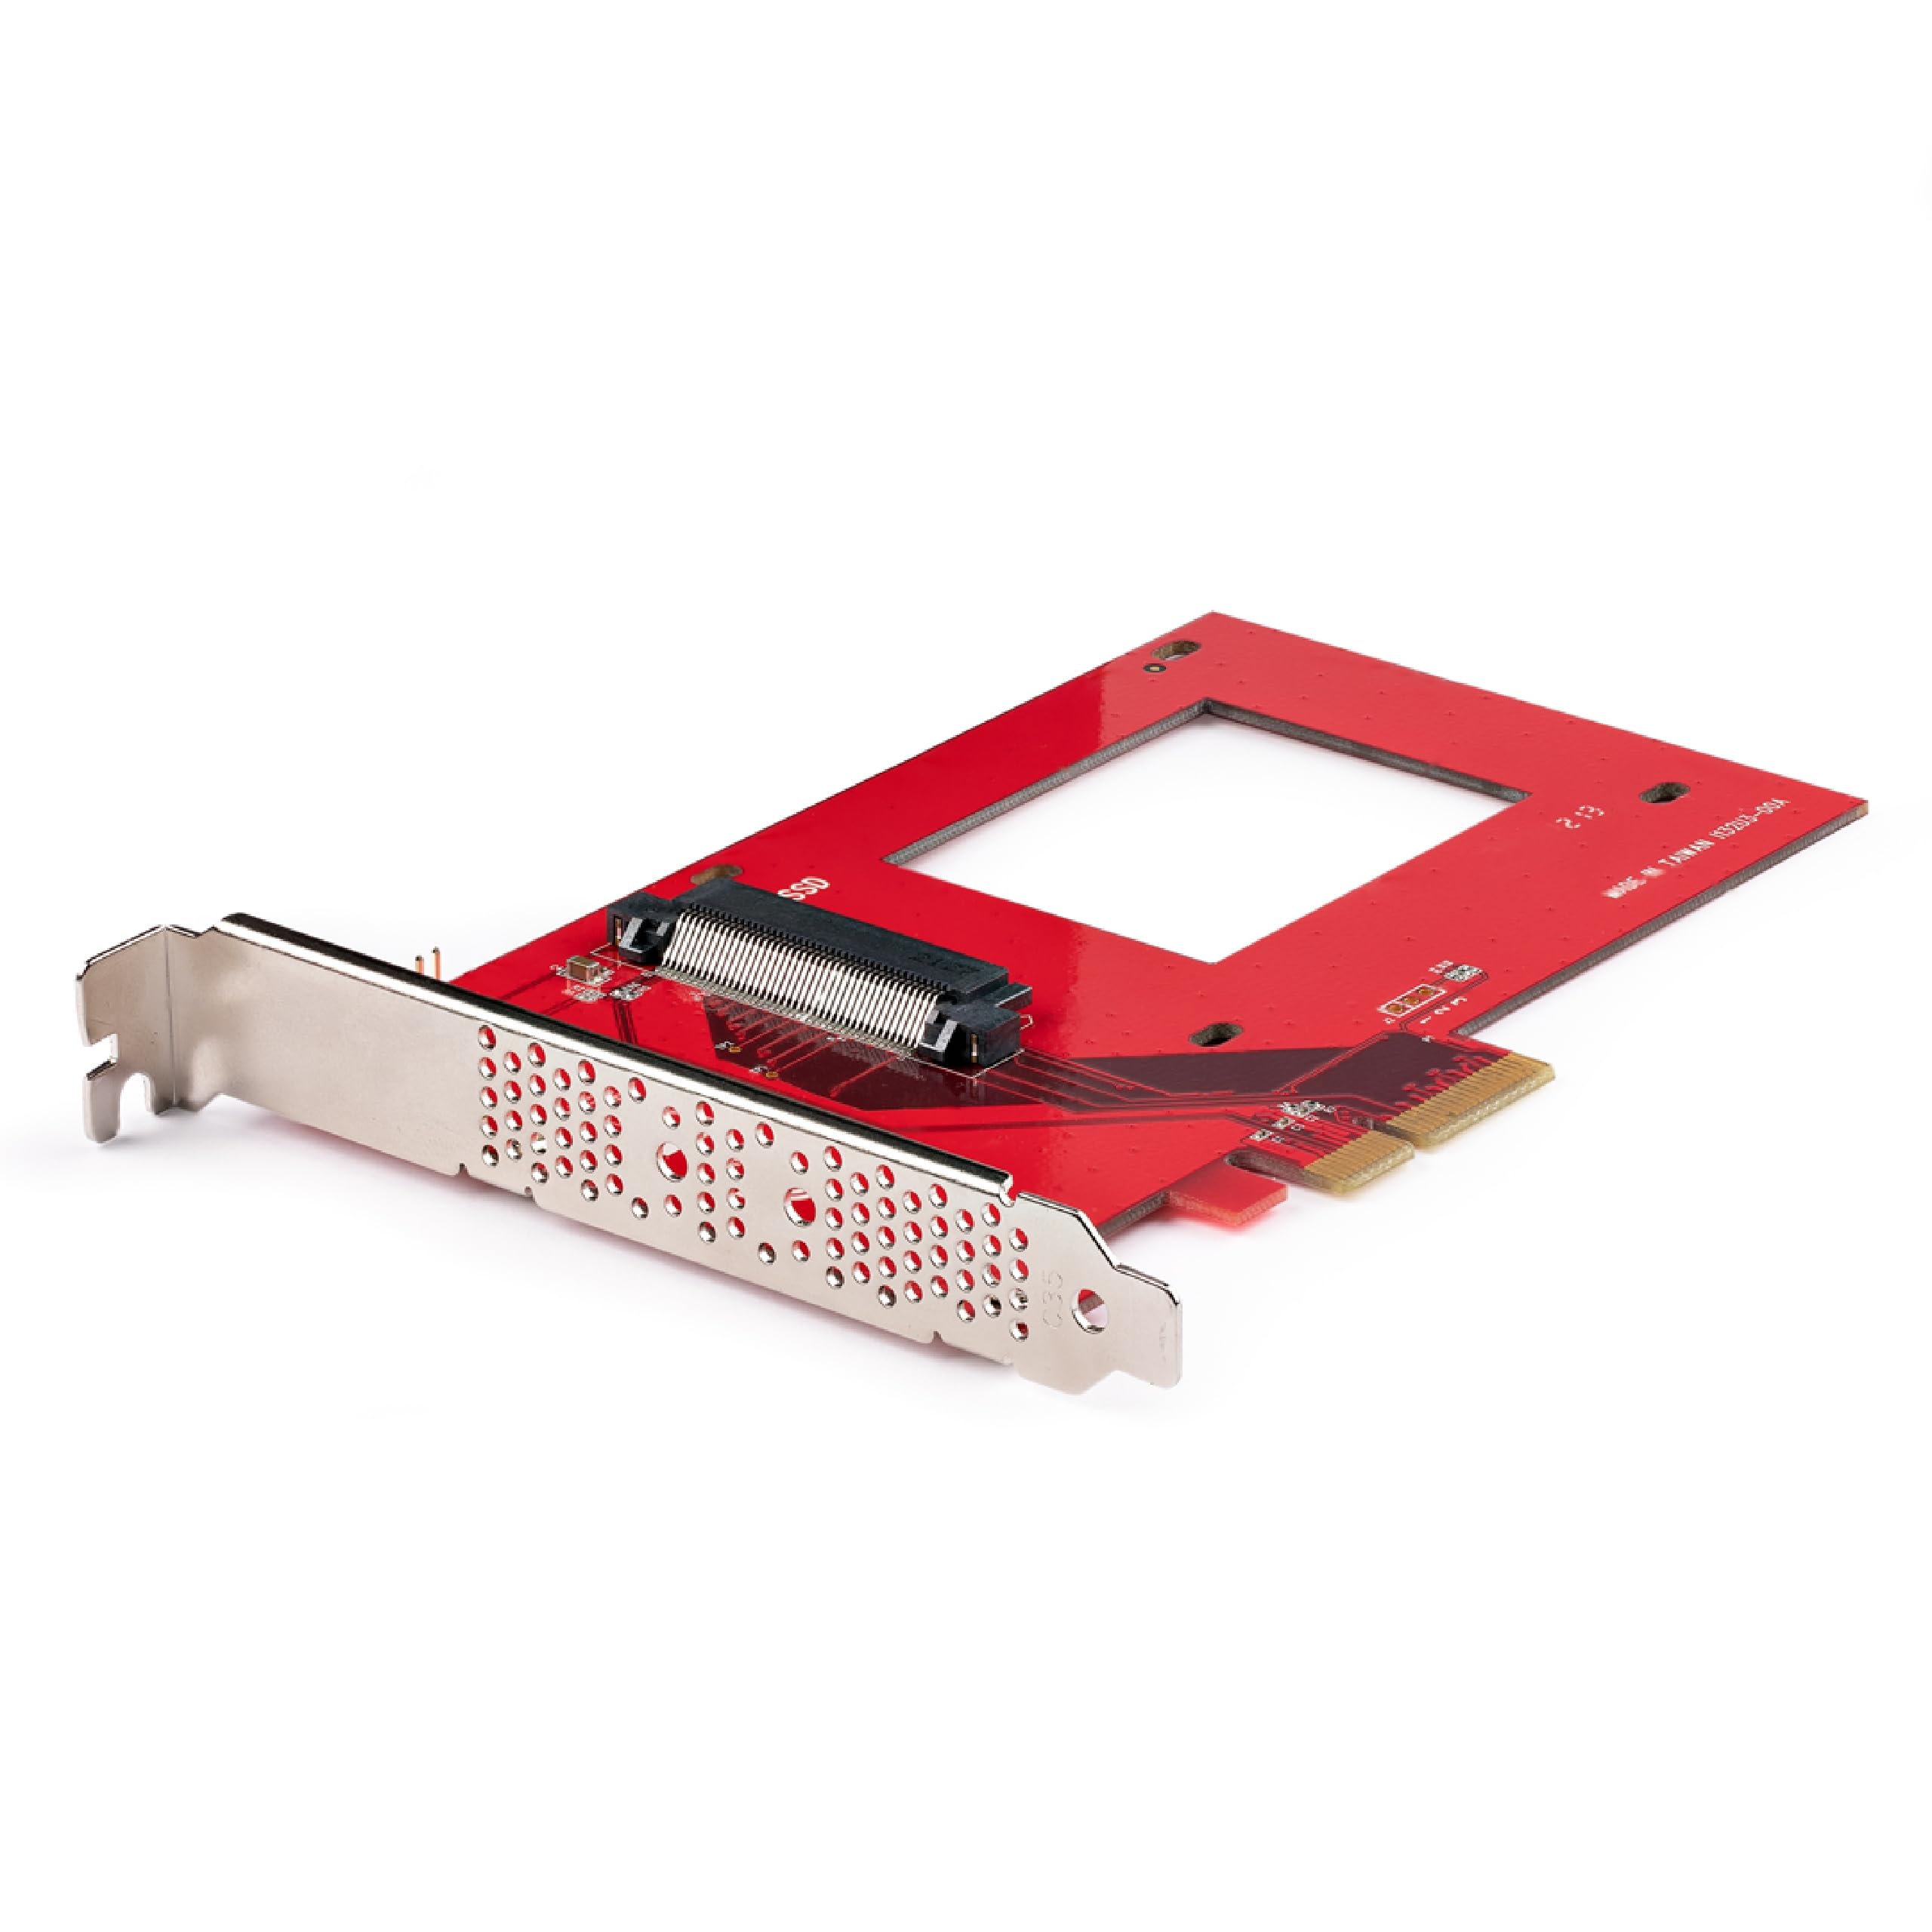 U.3 TO PCIE ADAPTER CARD - PCI